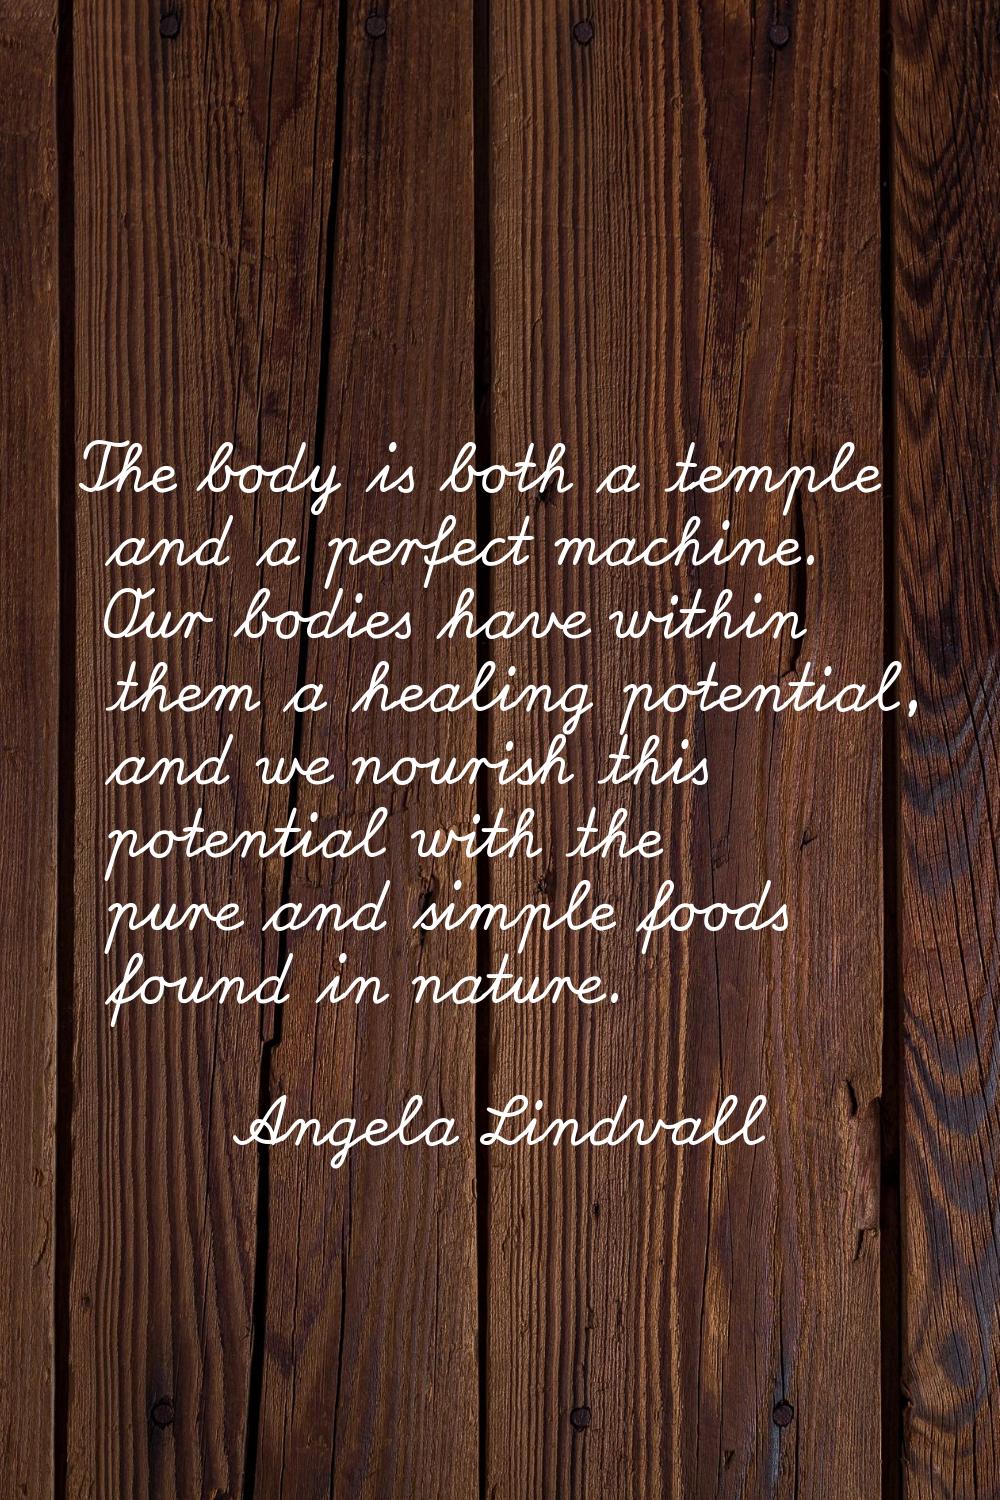 The body is both a temple and a perfect machine. Our bodies have within them a healing potential, a